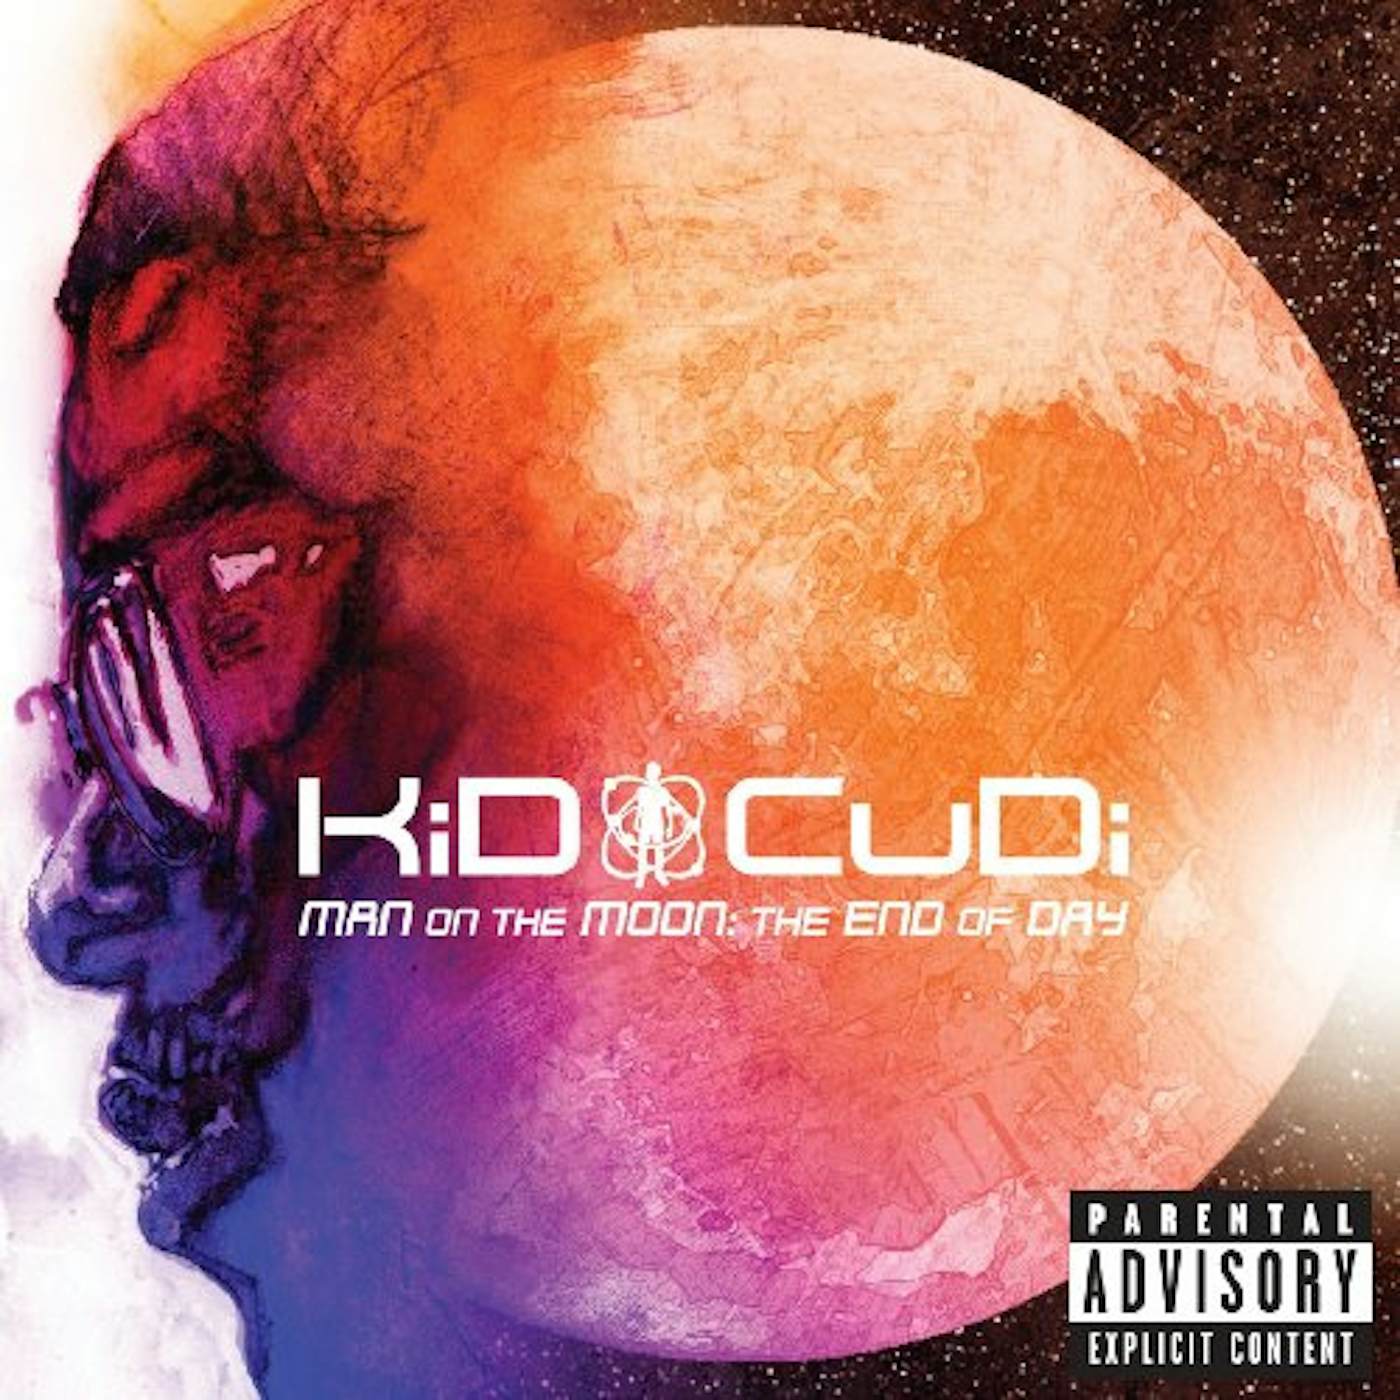 Kid Cudi MAN ON THE MOON: THE END OF DAY CD